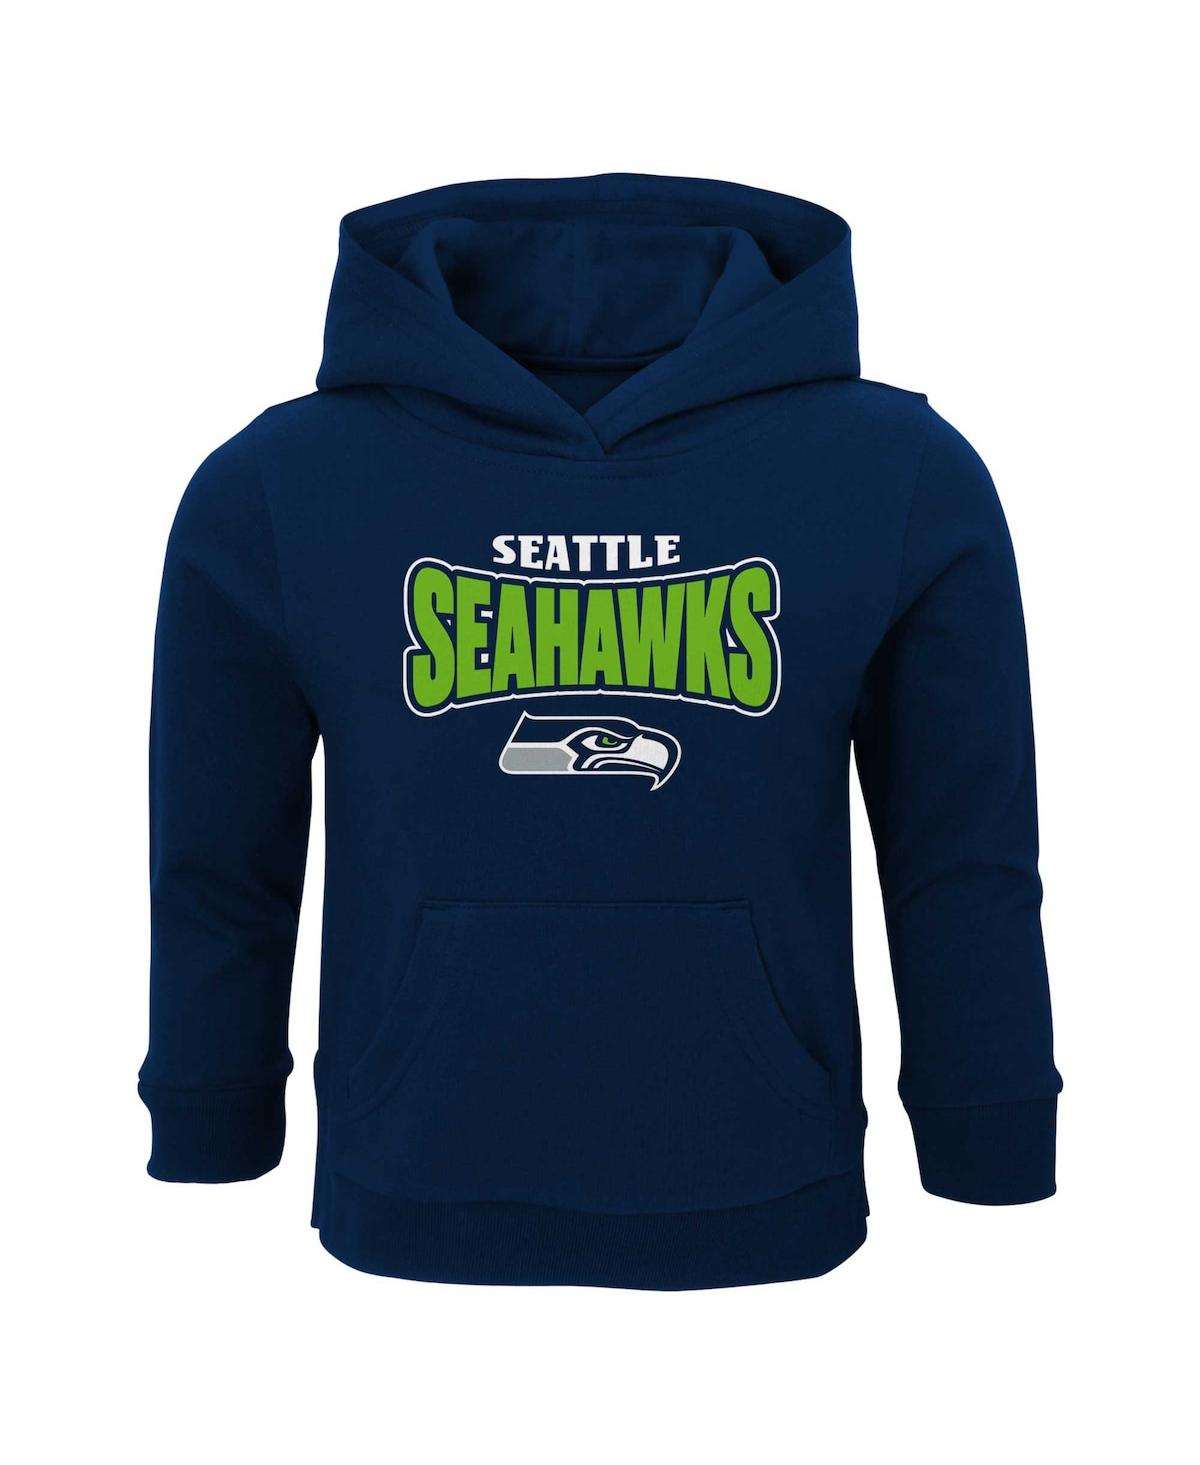 Outerstuff Kids' Toddler Boys And Girls College Navy Seattle Seahawks Draft Pick Pullover Hoodie